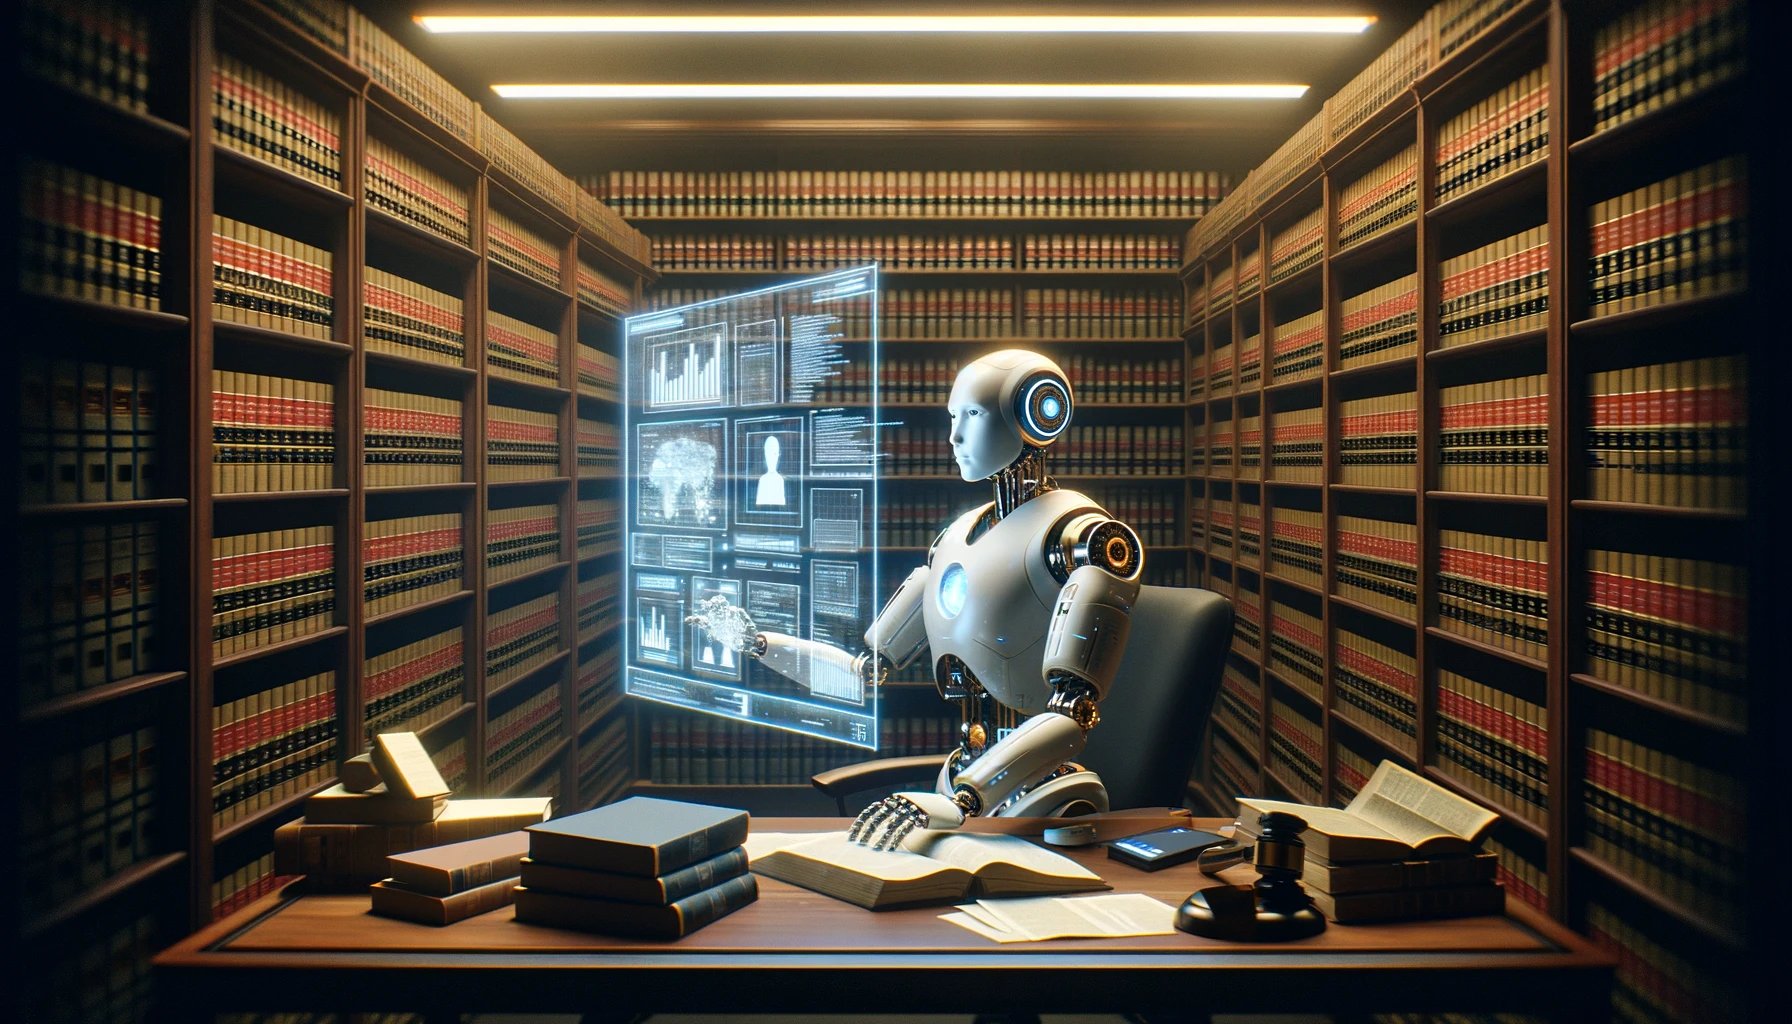 DALL·E 2024-03-23 02.39.34 - Imagine a scenario where a highly advanced AI legal consultant, visualized as a humanoid robot, is deeply involved in legal research within a law firm